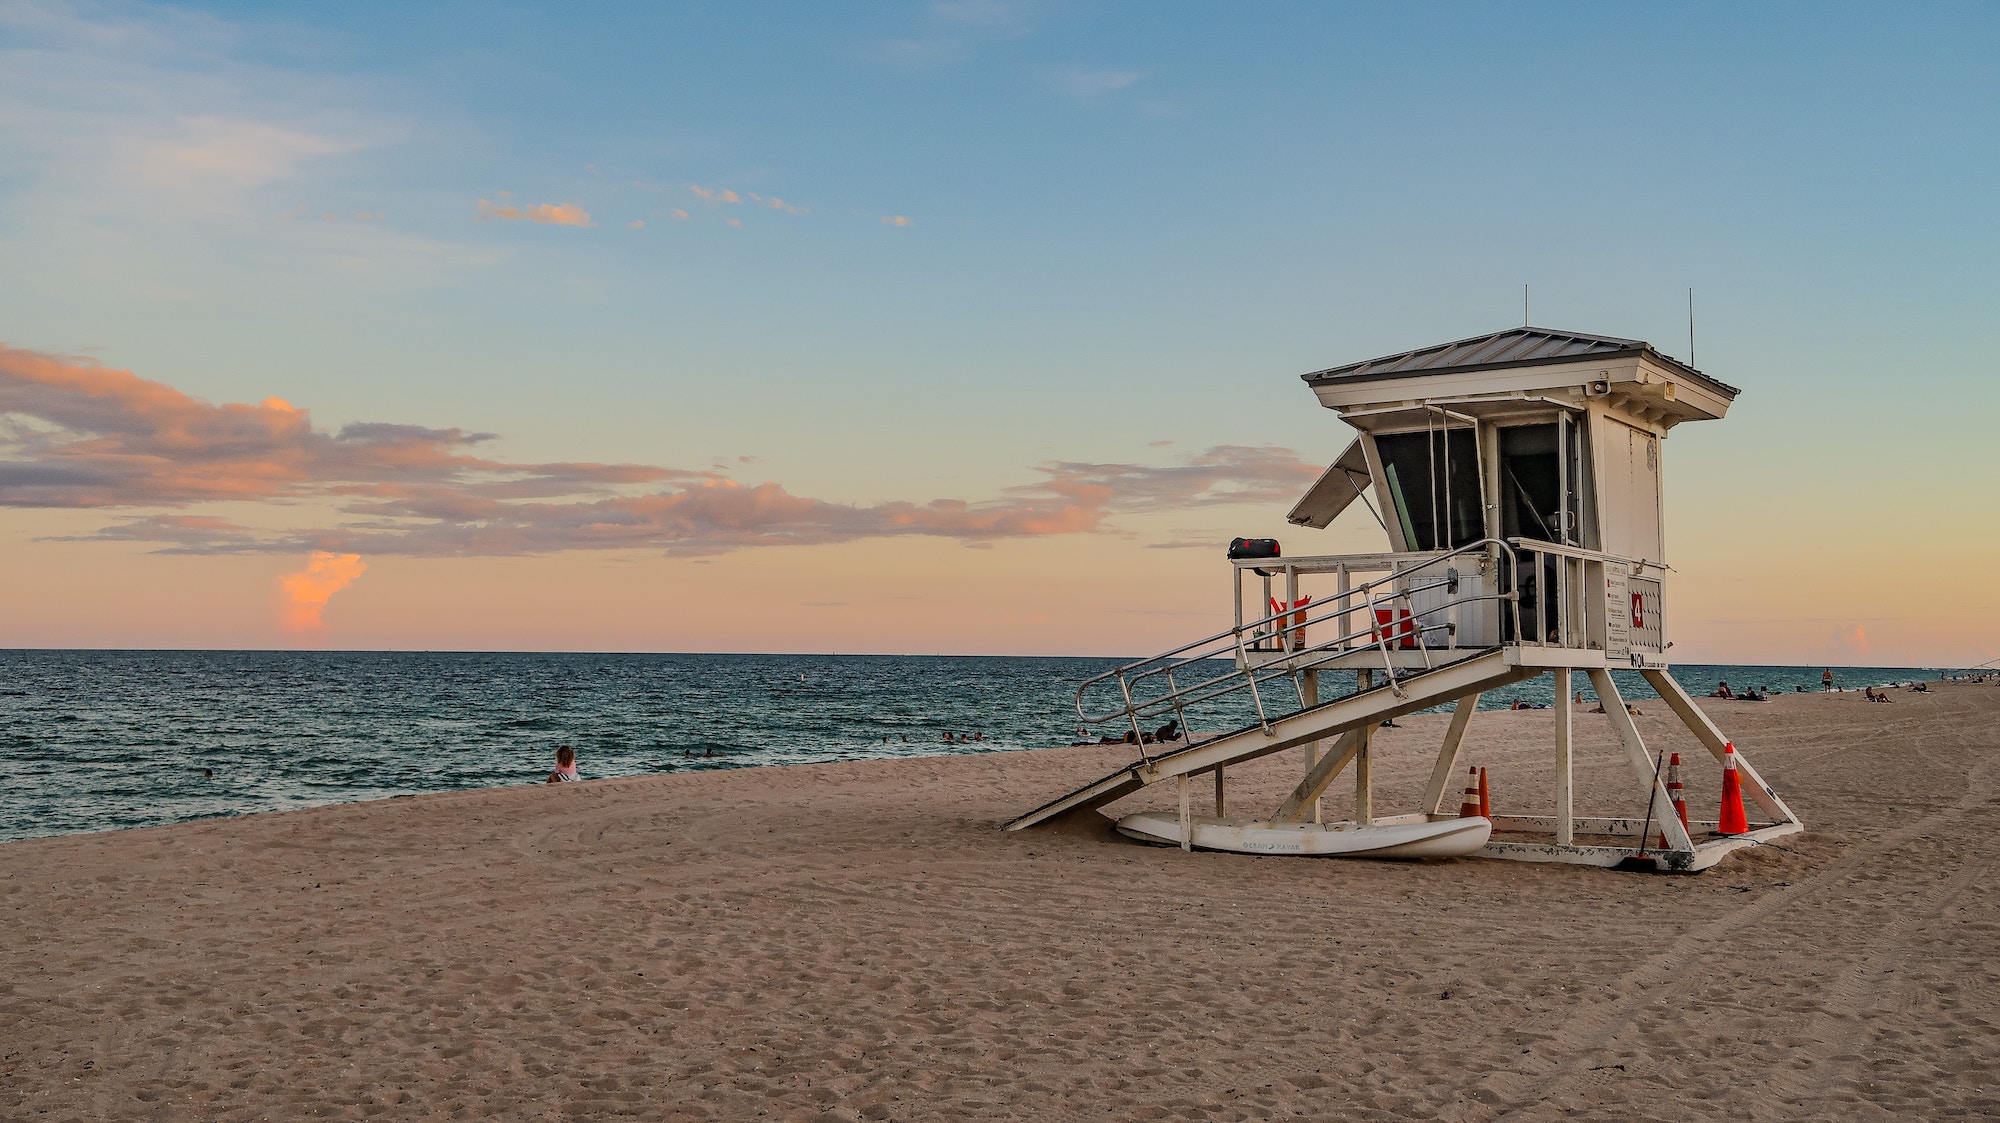 Image of Fort Lauderdale Beach and Lifeguard House